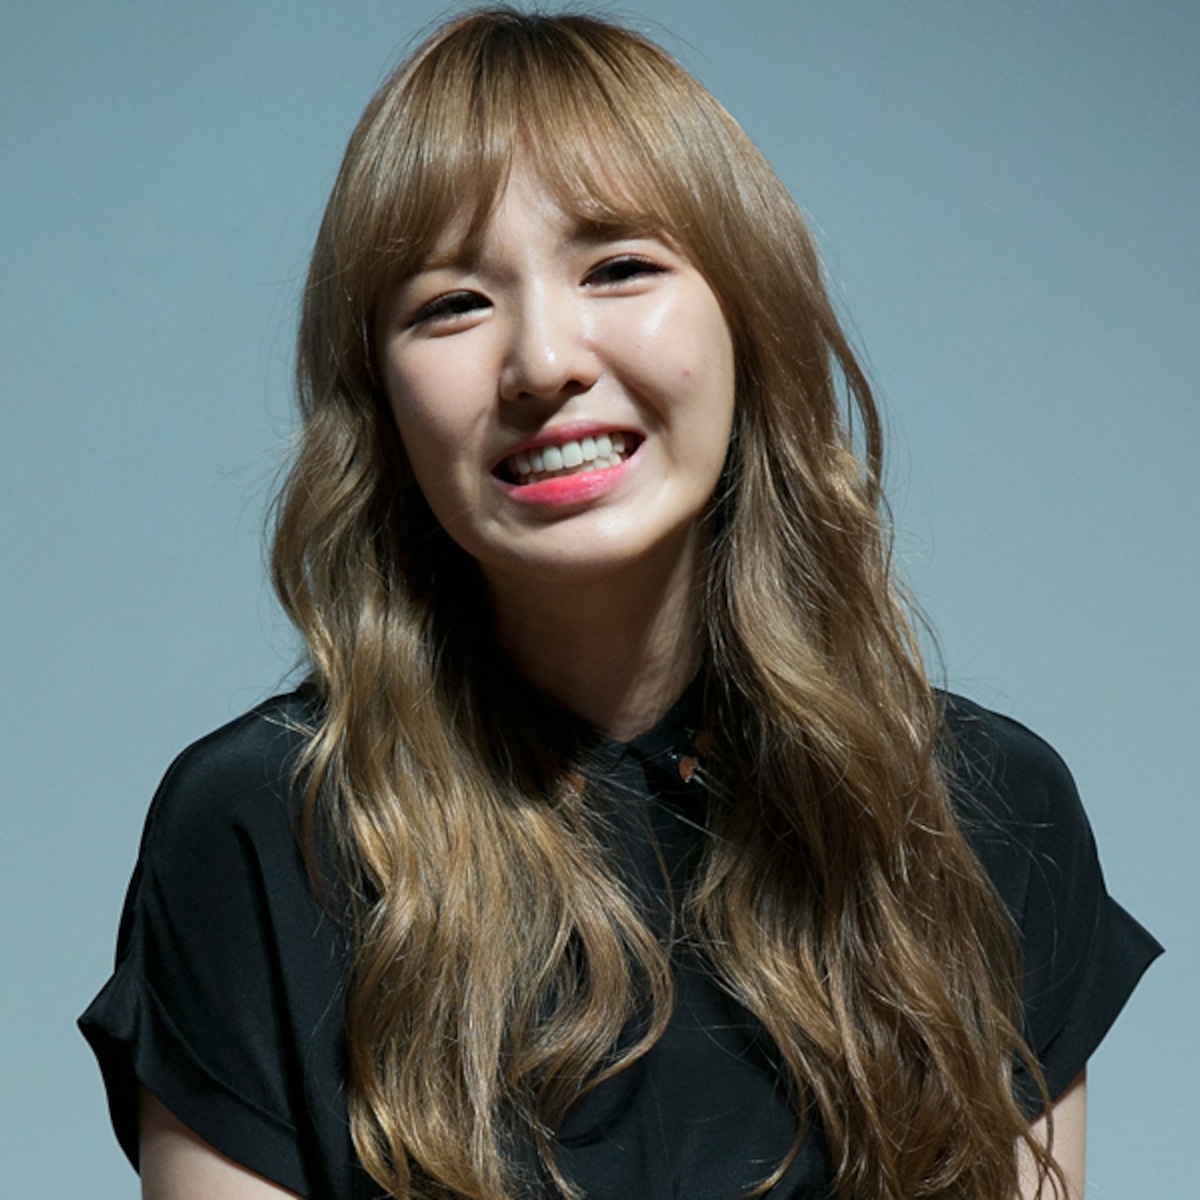 https://akns-images.eonline.com/eol_images/Entire_Site/20191126/rs_600x600-191226094039-600-wendy-red-velvet-k-pop.jpg?fit=around%7C1200:1200&amp;output-quality=90&amp;crop=1200:1200;center,top